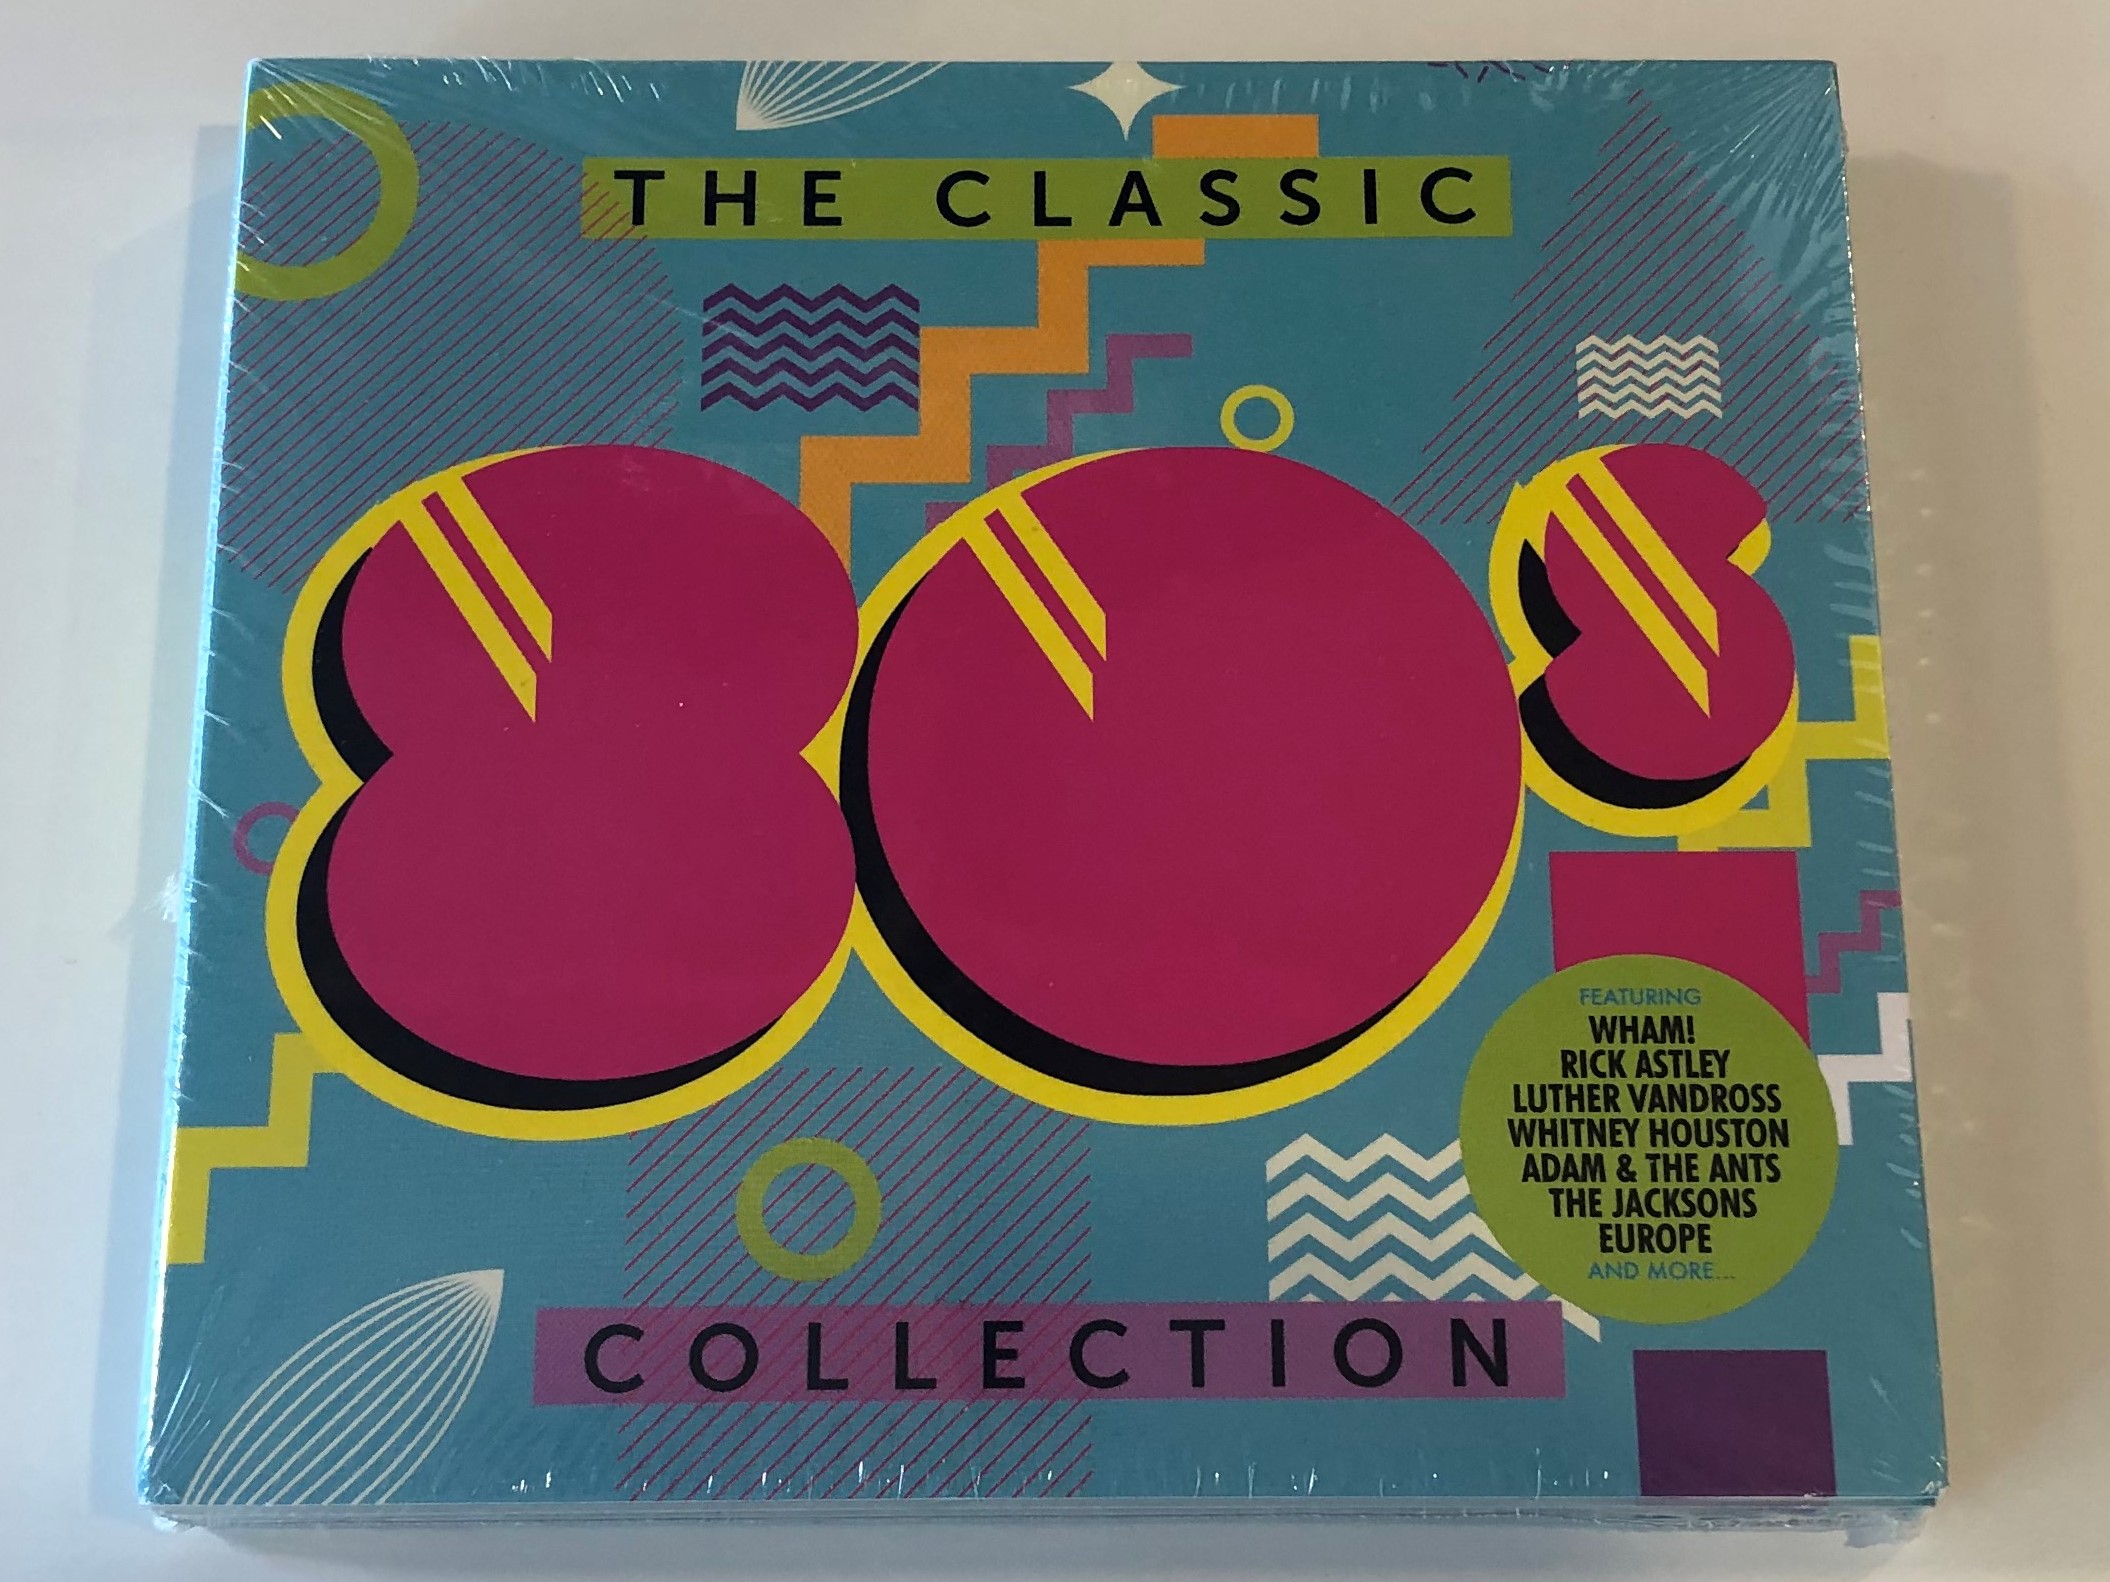 the-classic-80s-collection-featuring-wham-rick-astley-luther-vandross-whitney-houston-adam-the-ants-the-jacksons-europe-and-many-more...-sony-music-3x-audio-cd-2017-88985440422-1-.jpg